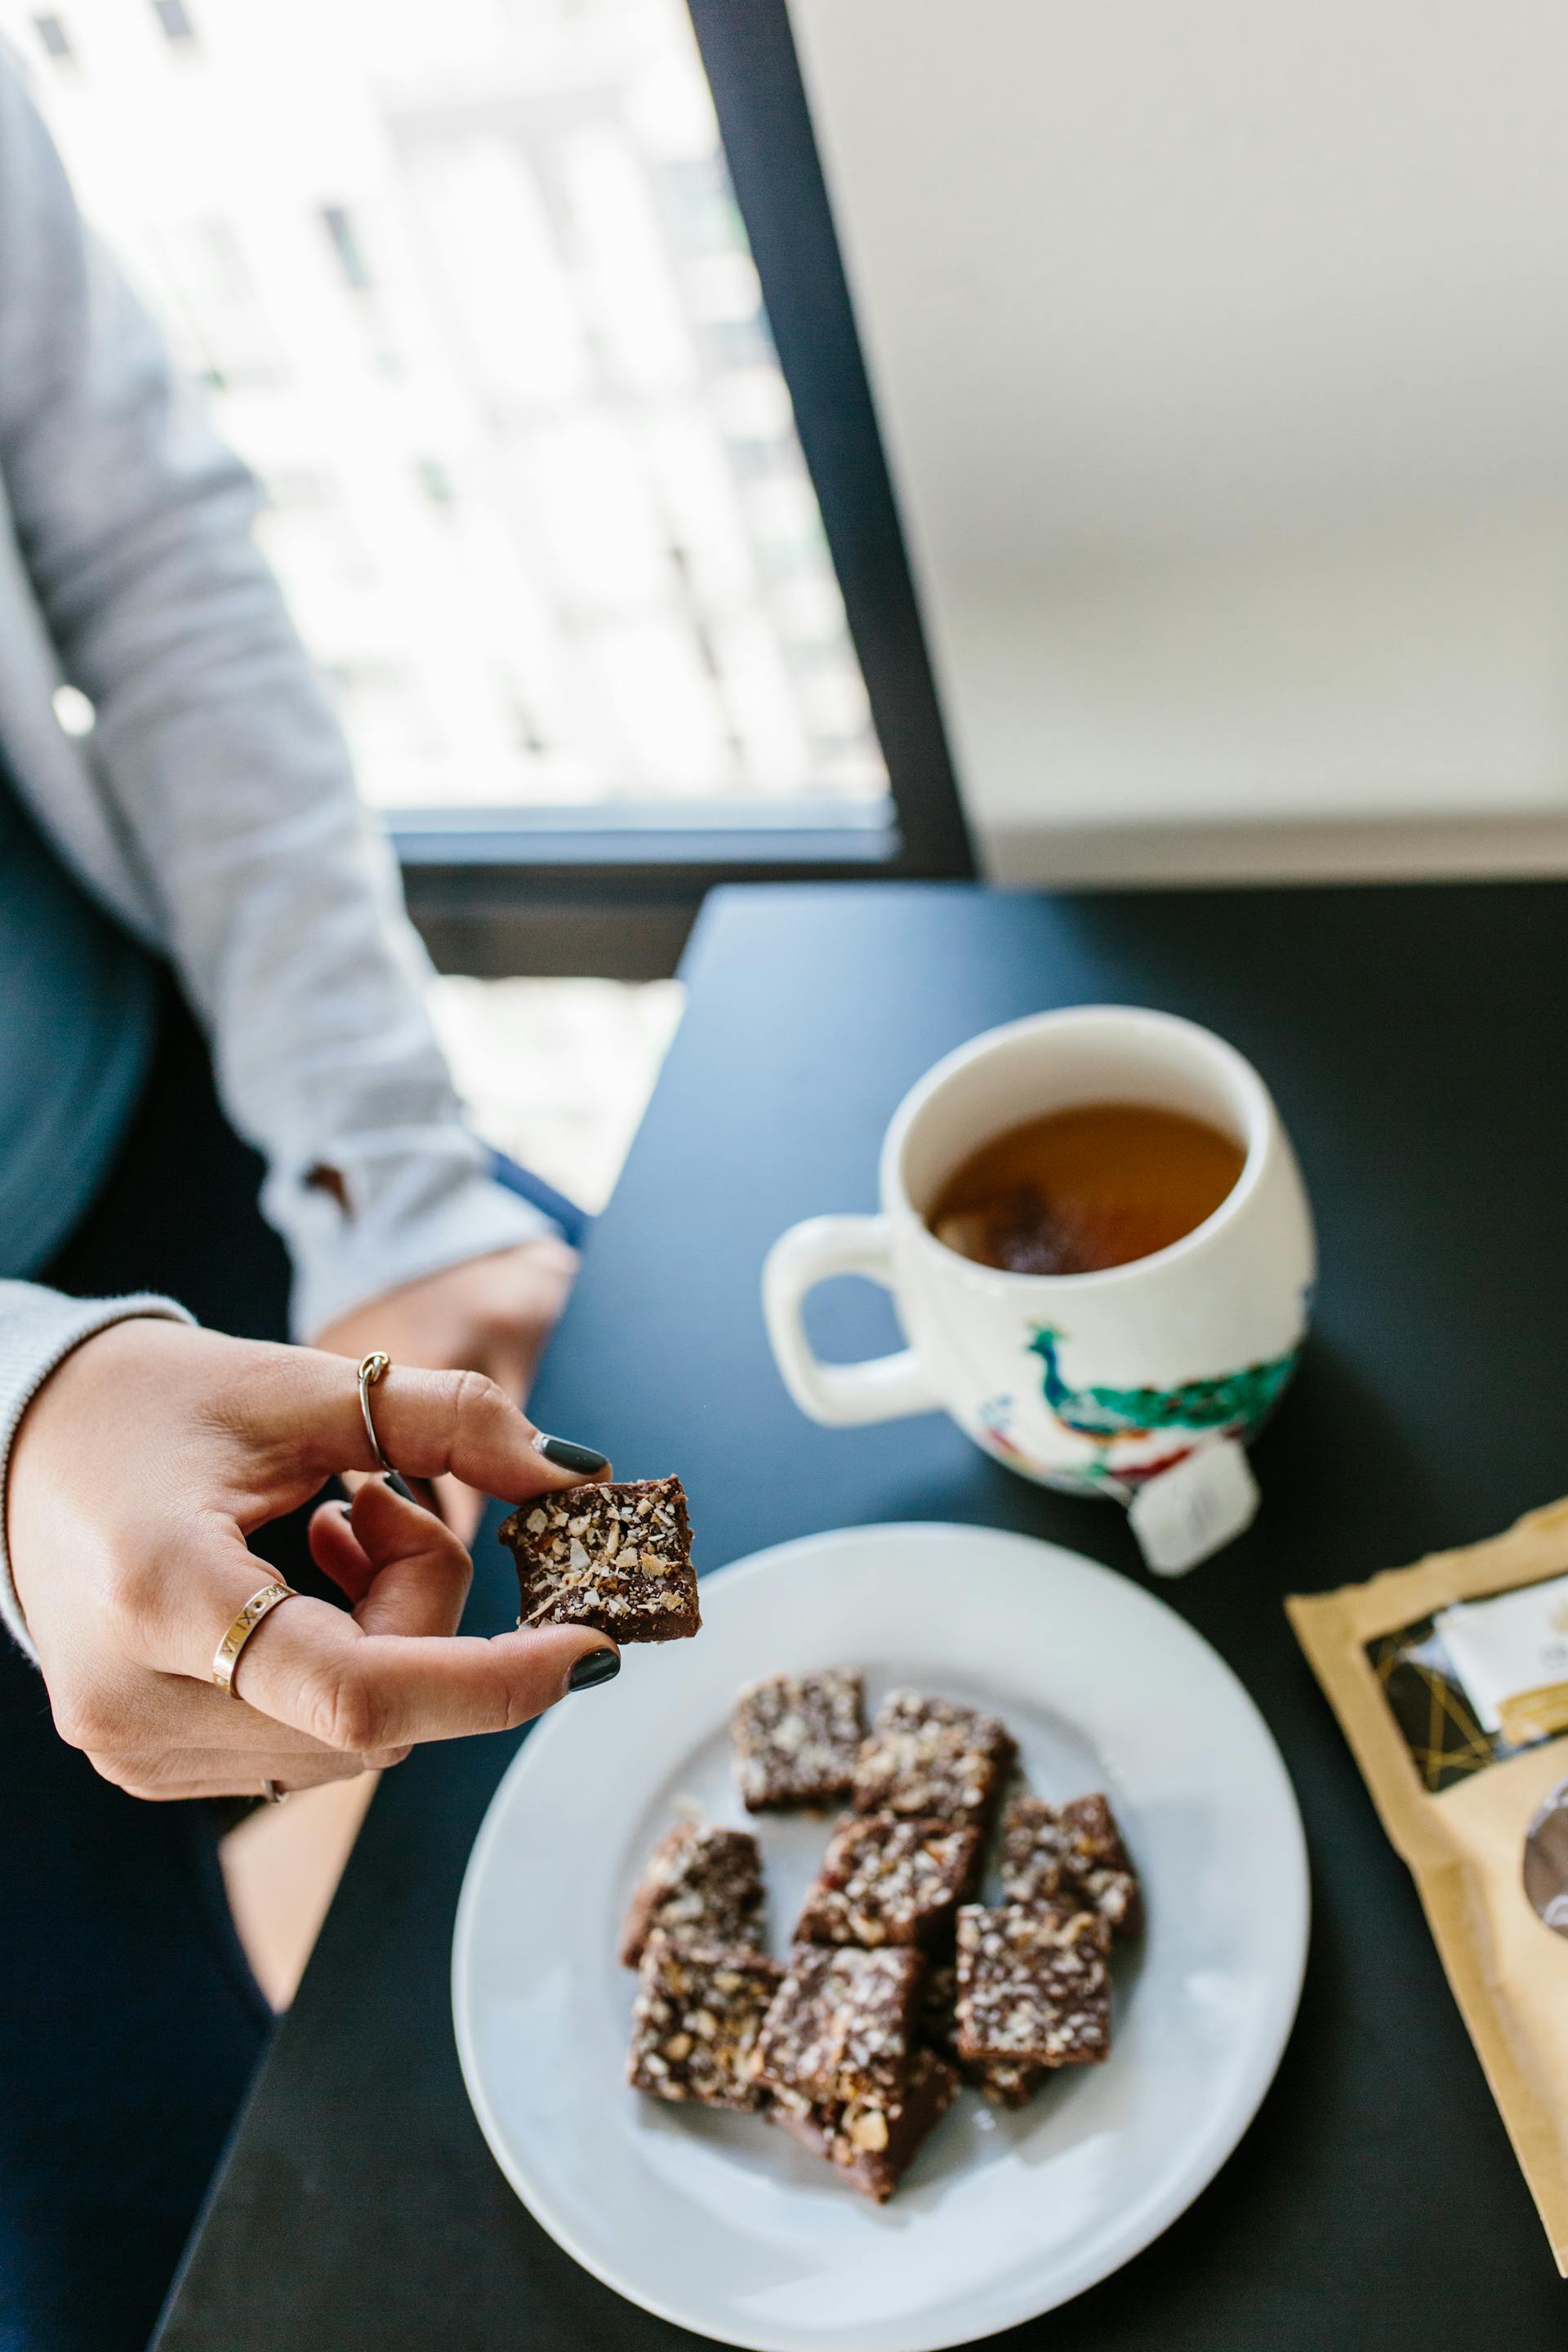 A person holding a brownie | Source: Pexels